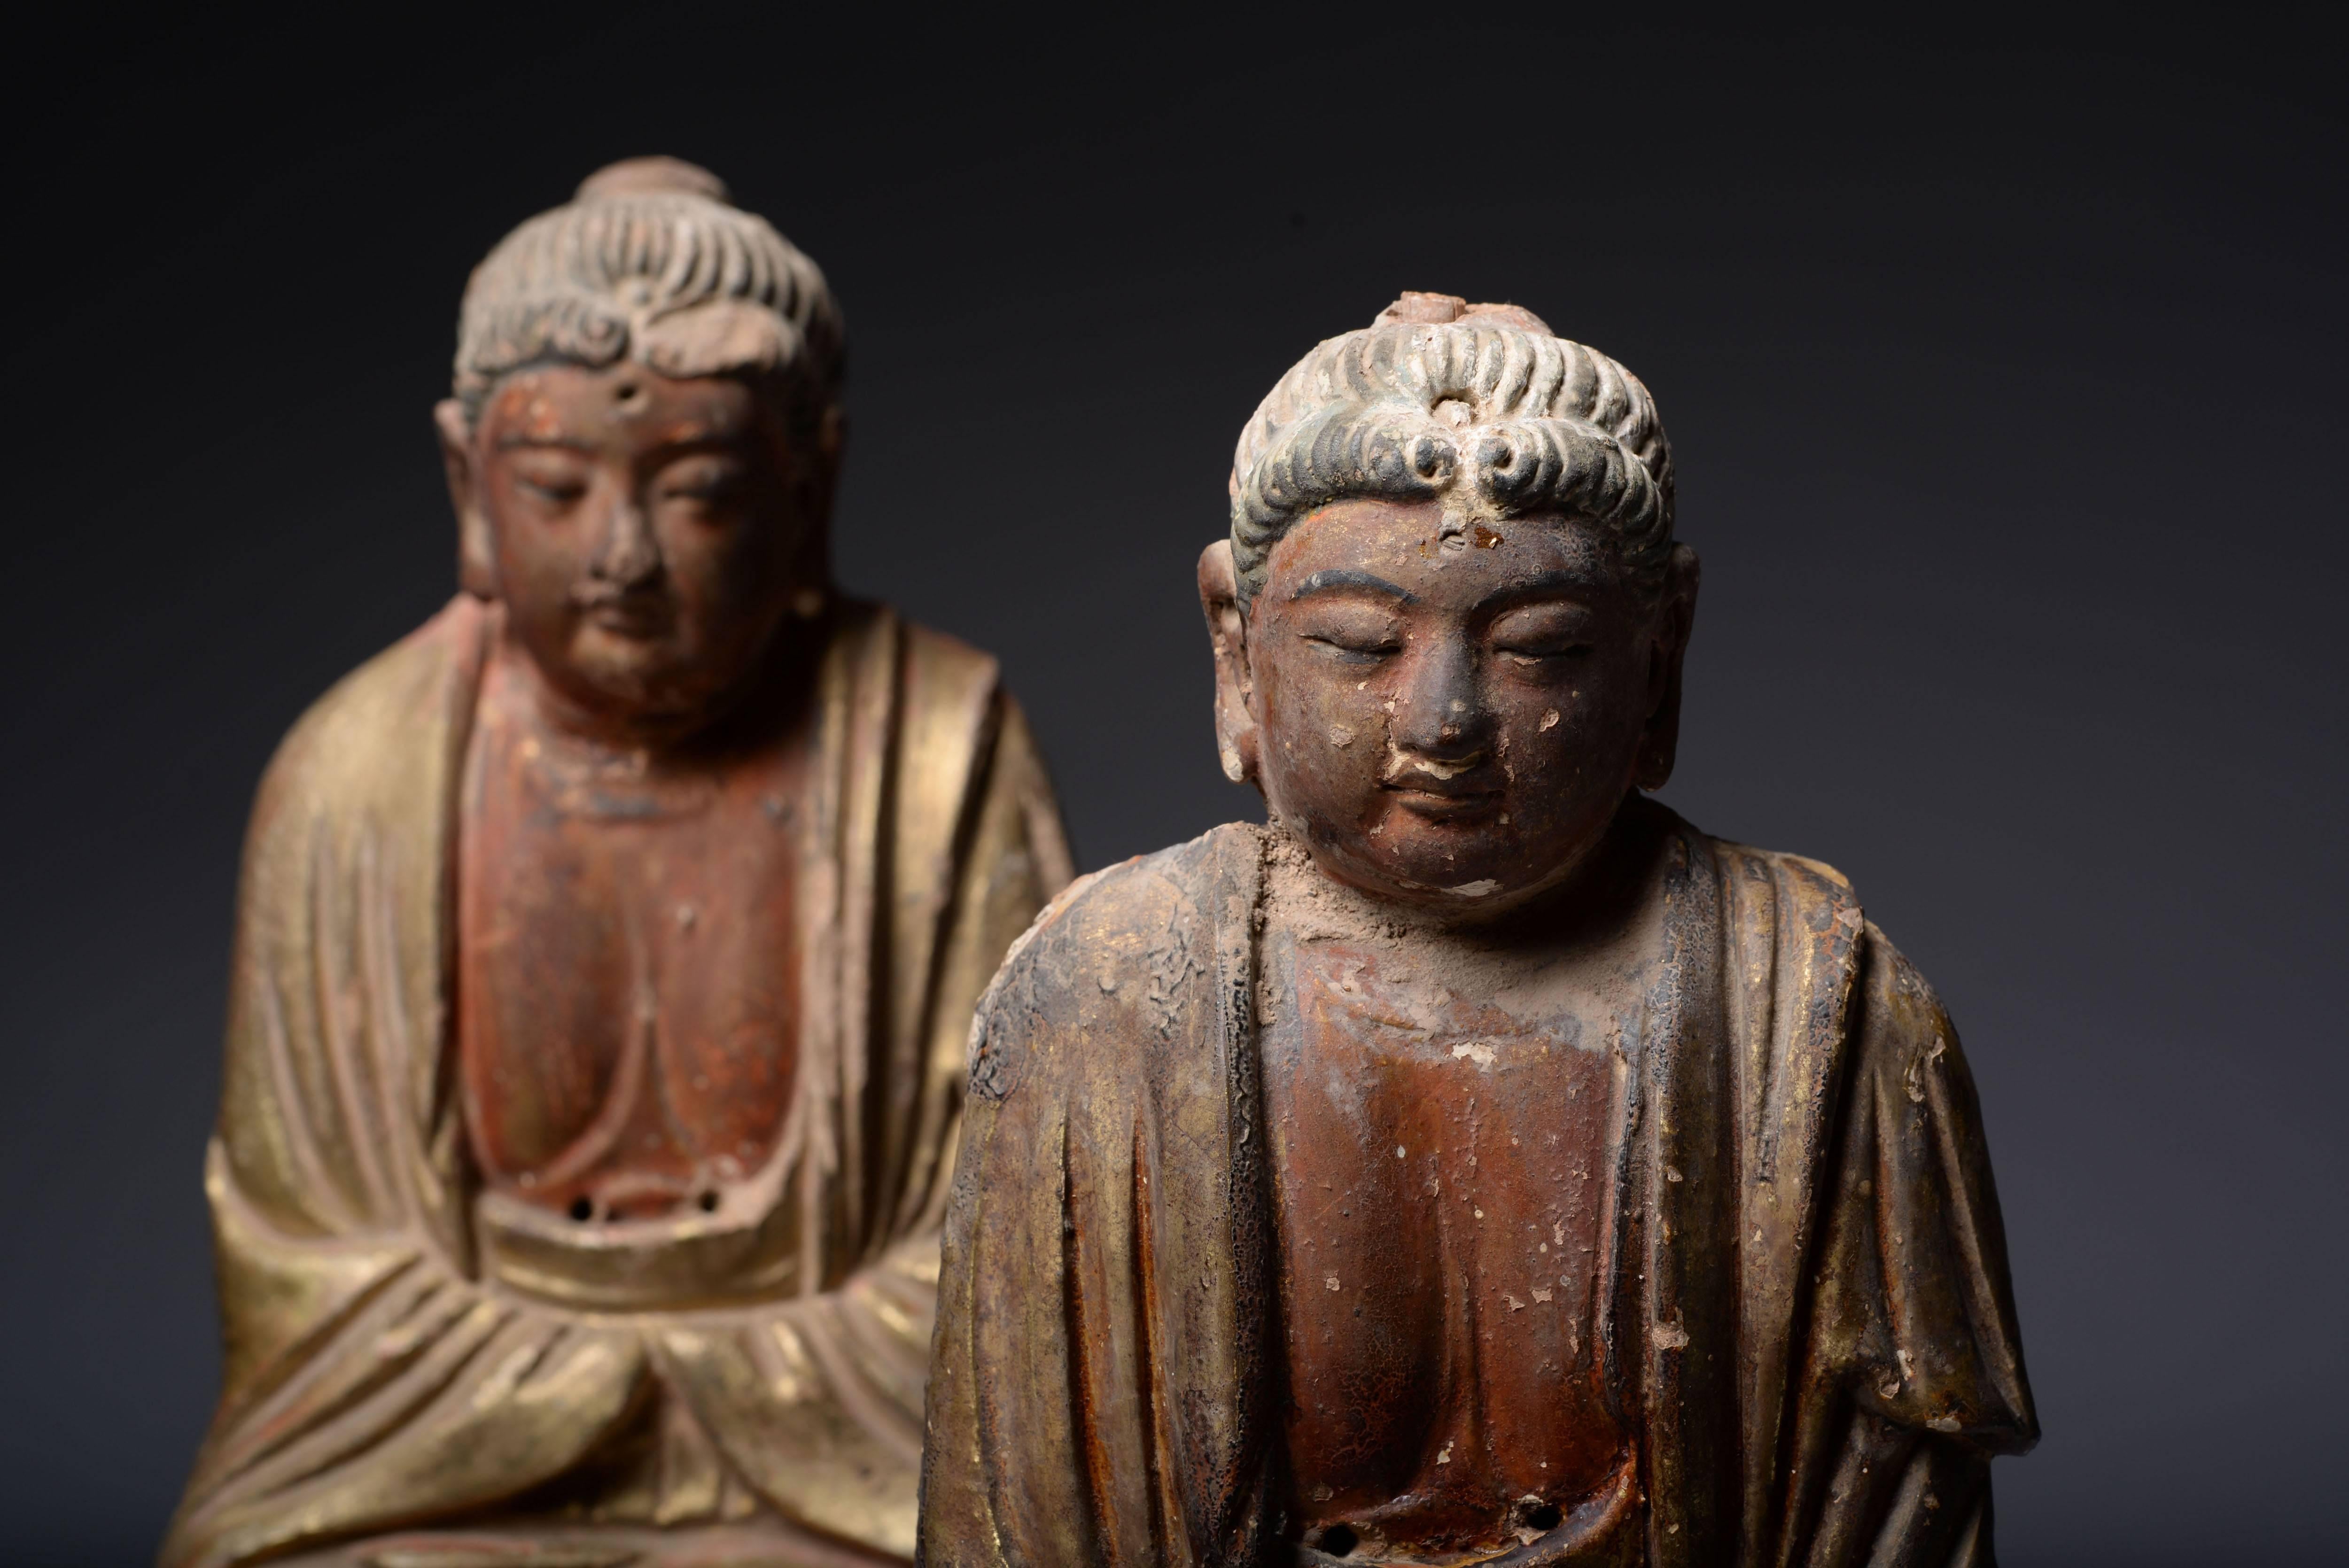 A pair of Chinese Yuan - early Ming dynasty parcel gilt painted terracotta figures of Buddha, dating to approximately 1275 – 1400 AD.

These beautiful and elaborate figures of Buddha are relatively unusual examples of medieval Chinese art, being